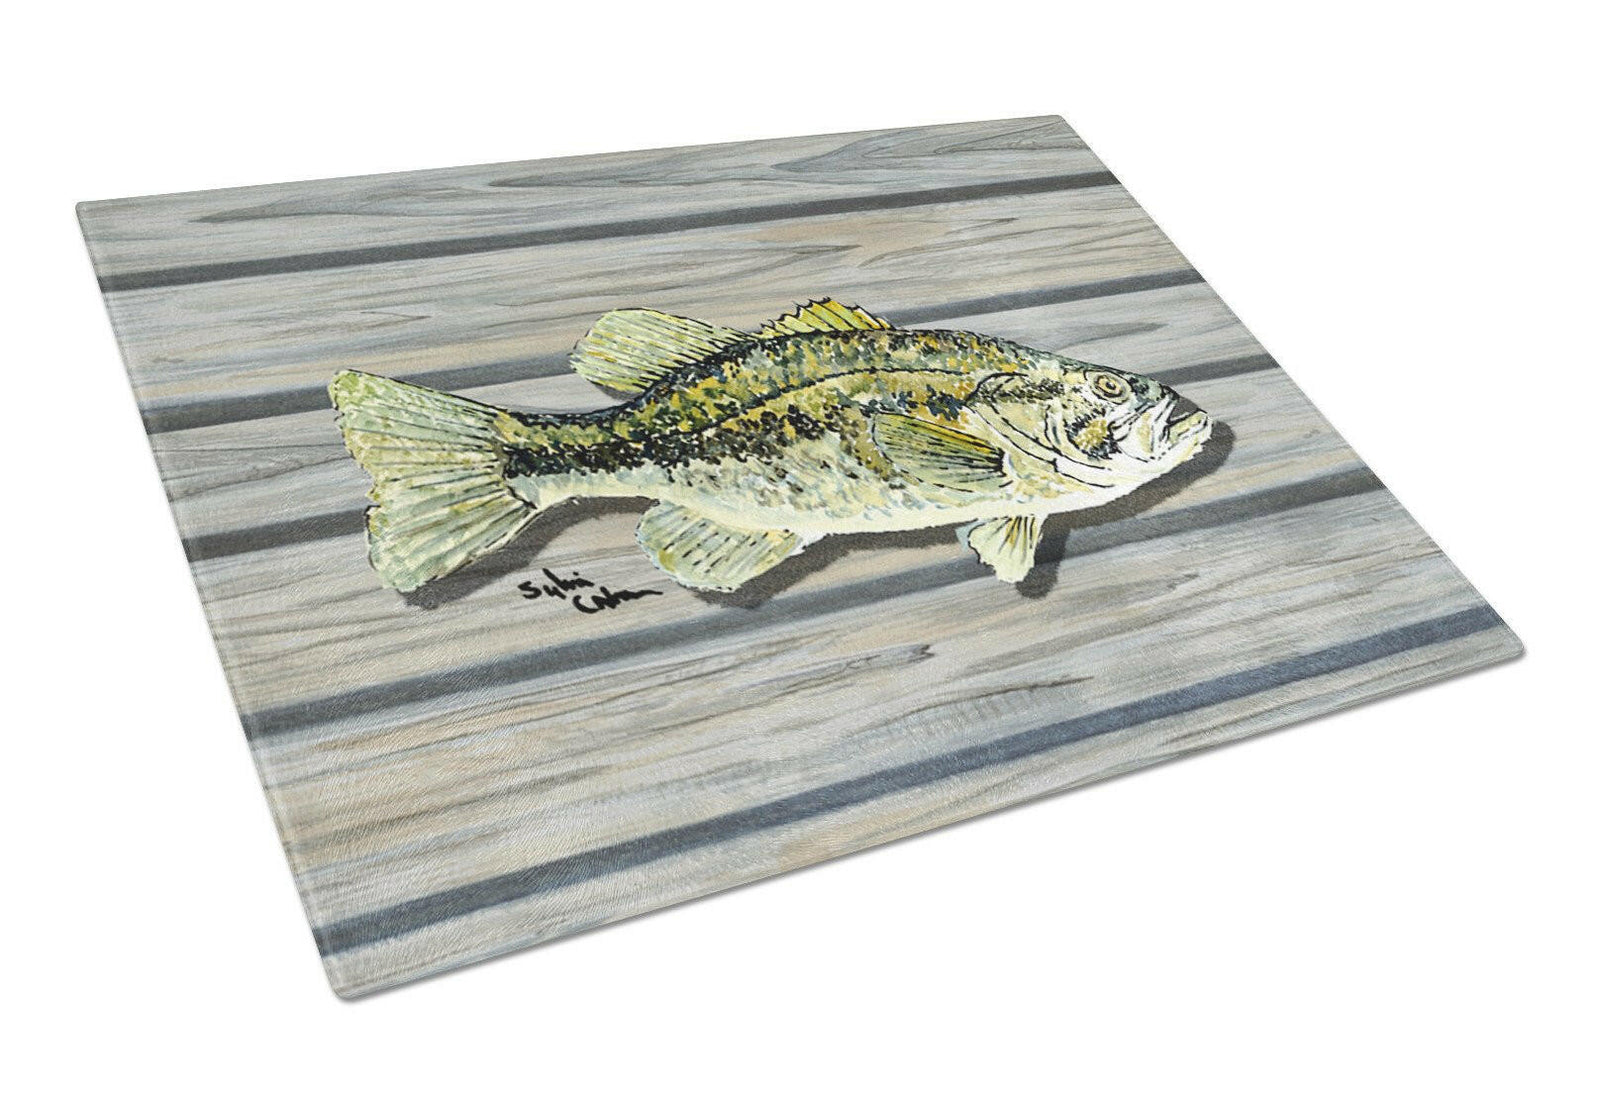 Small mouth bass on the wharf Glass Cutting Board by Caroline's Treasures